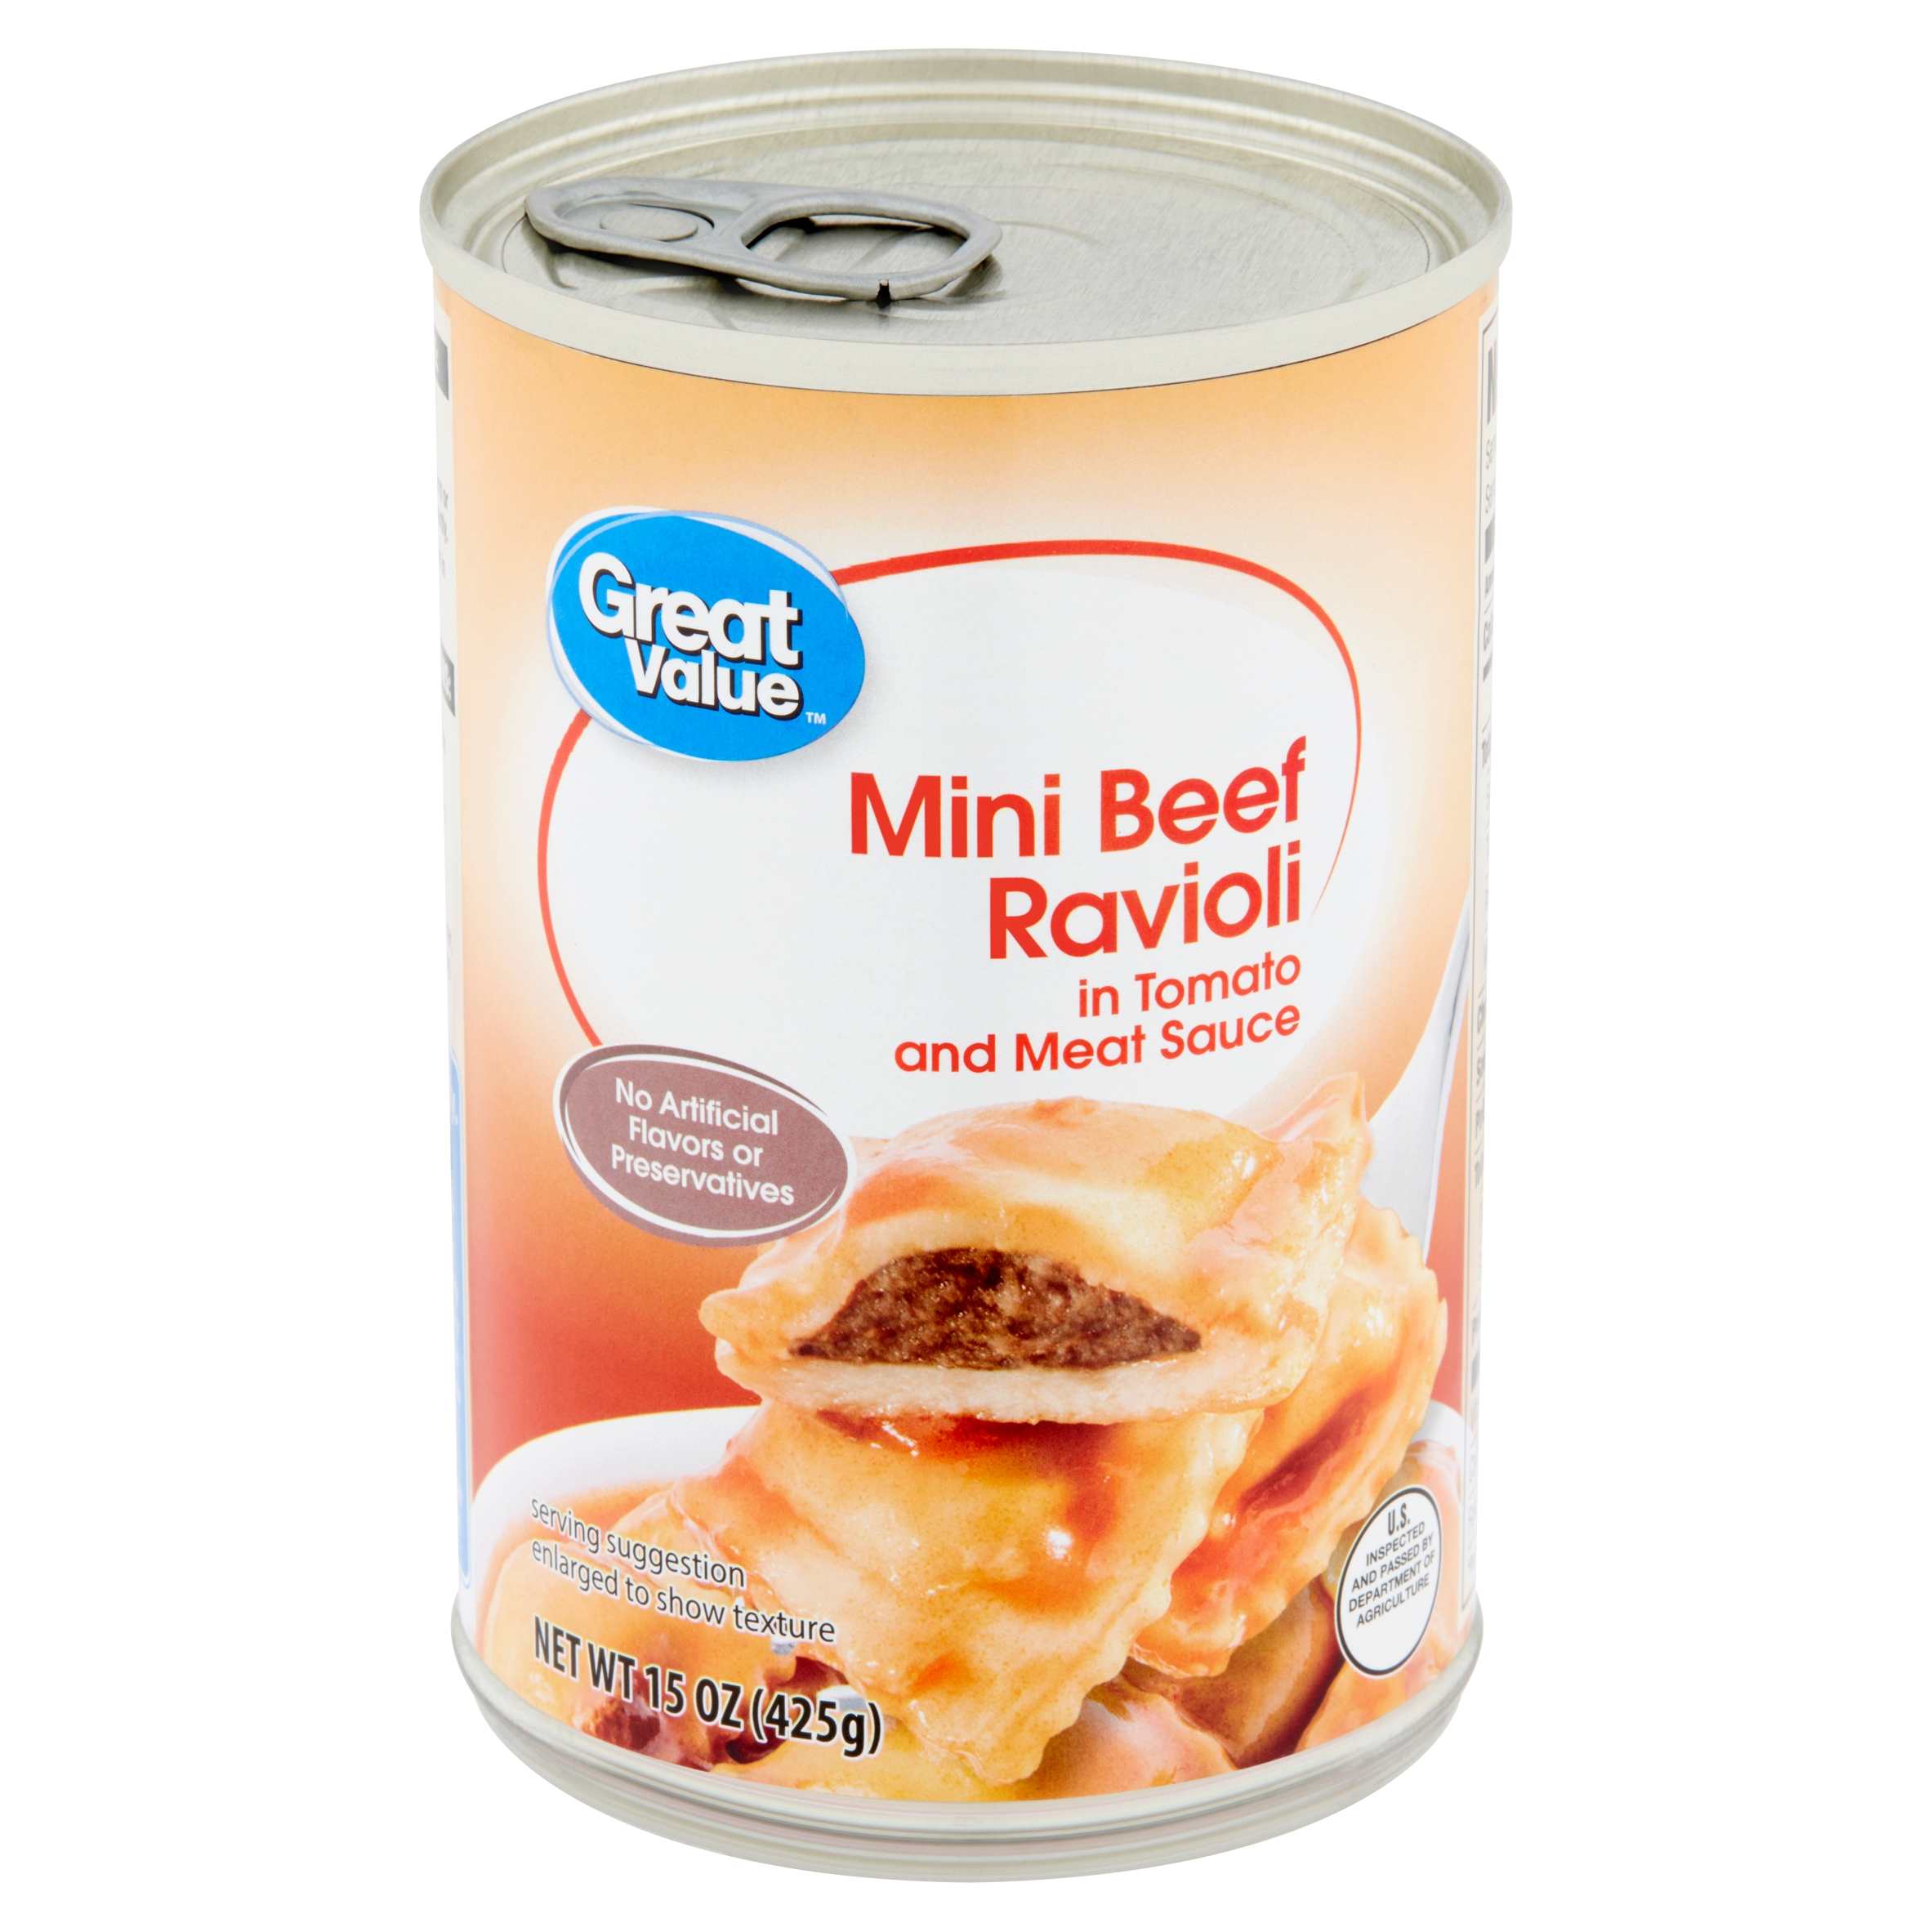 Great Value Mini Beef Ravioli in Tomato and Meat Sauce 15 Oz Image